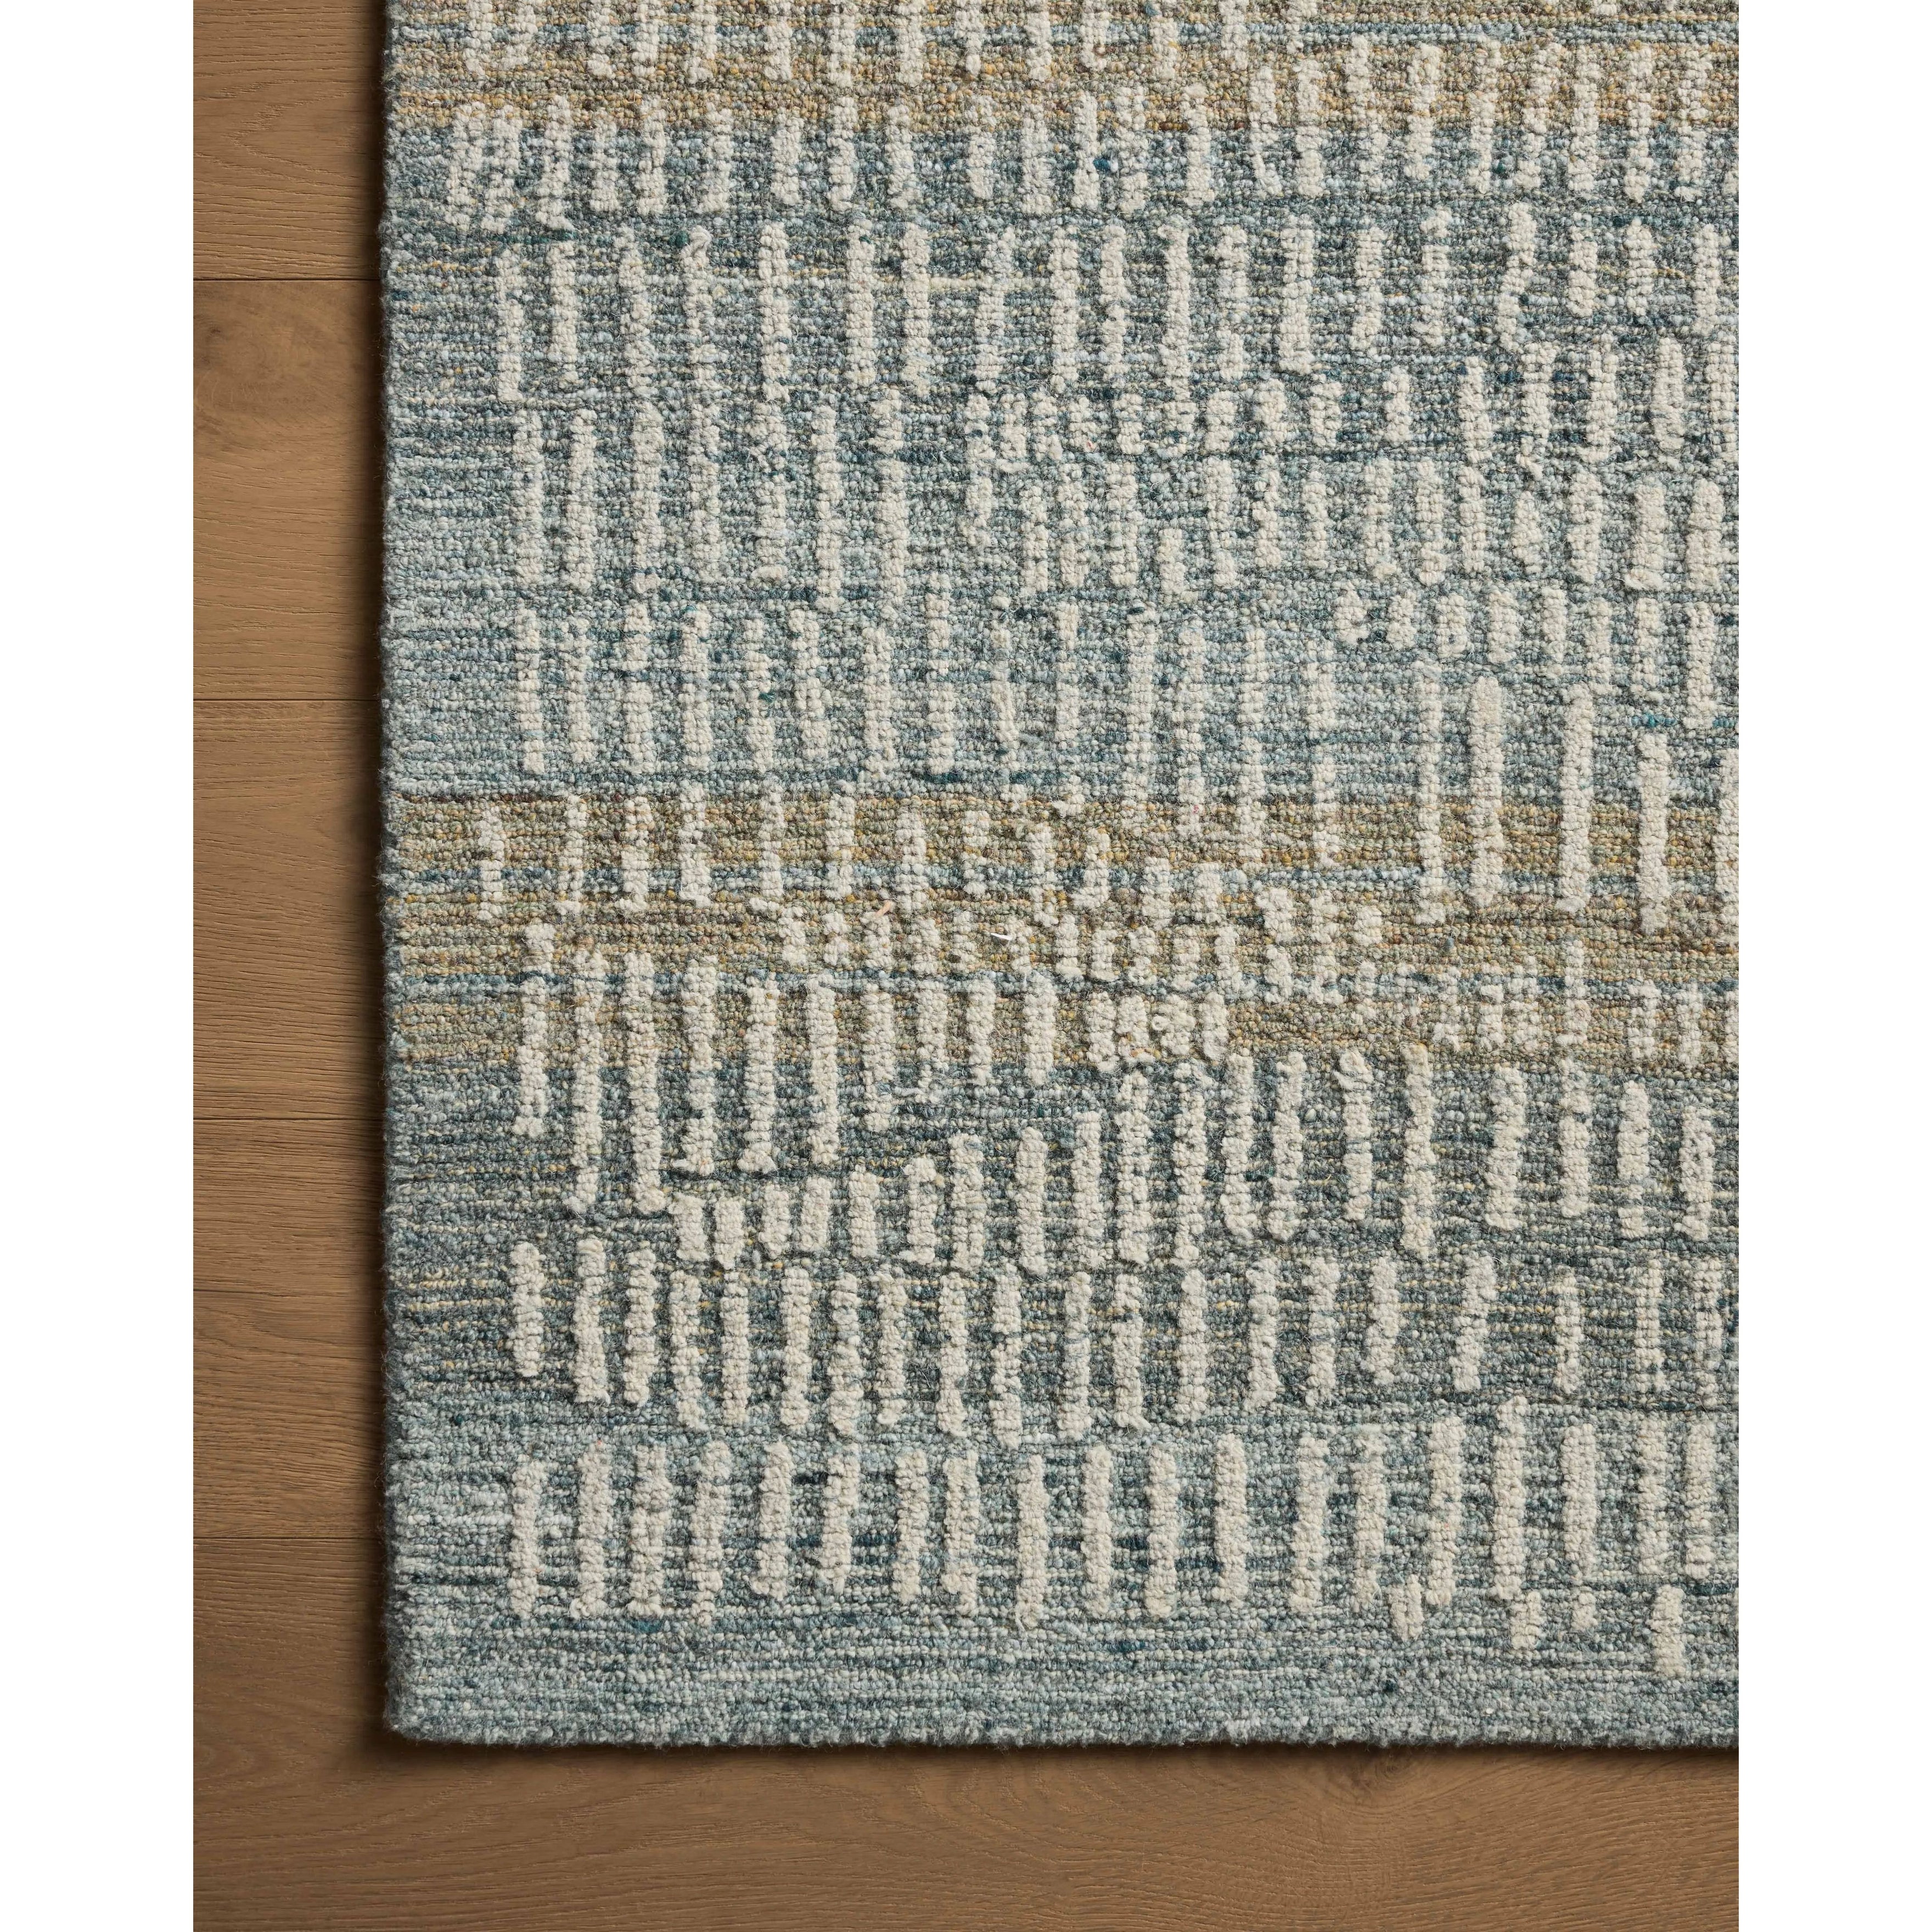 The Elias Ocean / Oatmeal Rug is a hand-tufted wool area rug with lively graphic patterns in earth and stone tones. There’s a unique texture to the rug made by over-tufting, in which a design is hand-tufted over a tufted base, creating a subtle high-low pile. Amethyst Home provides interior design, new home construction design consulting, vintage area rugs, and lighting in the Calabasas metro area.